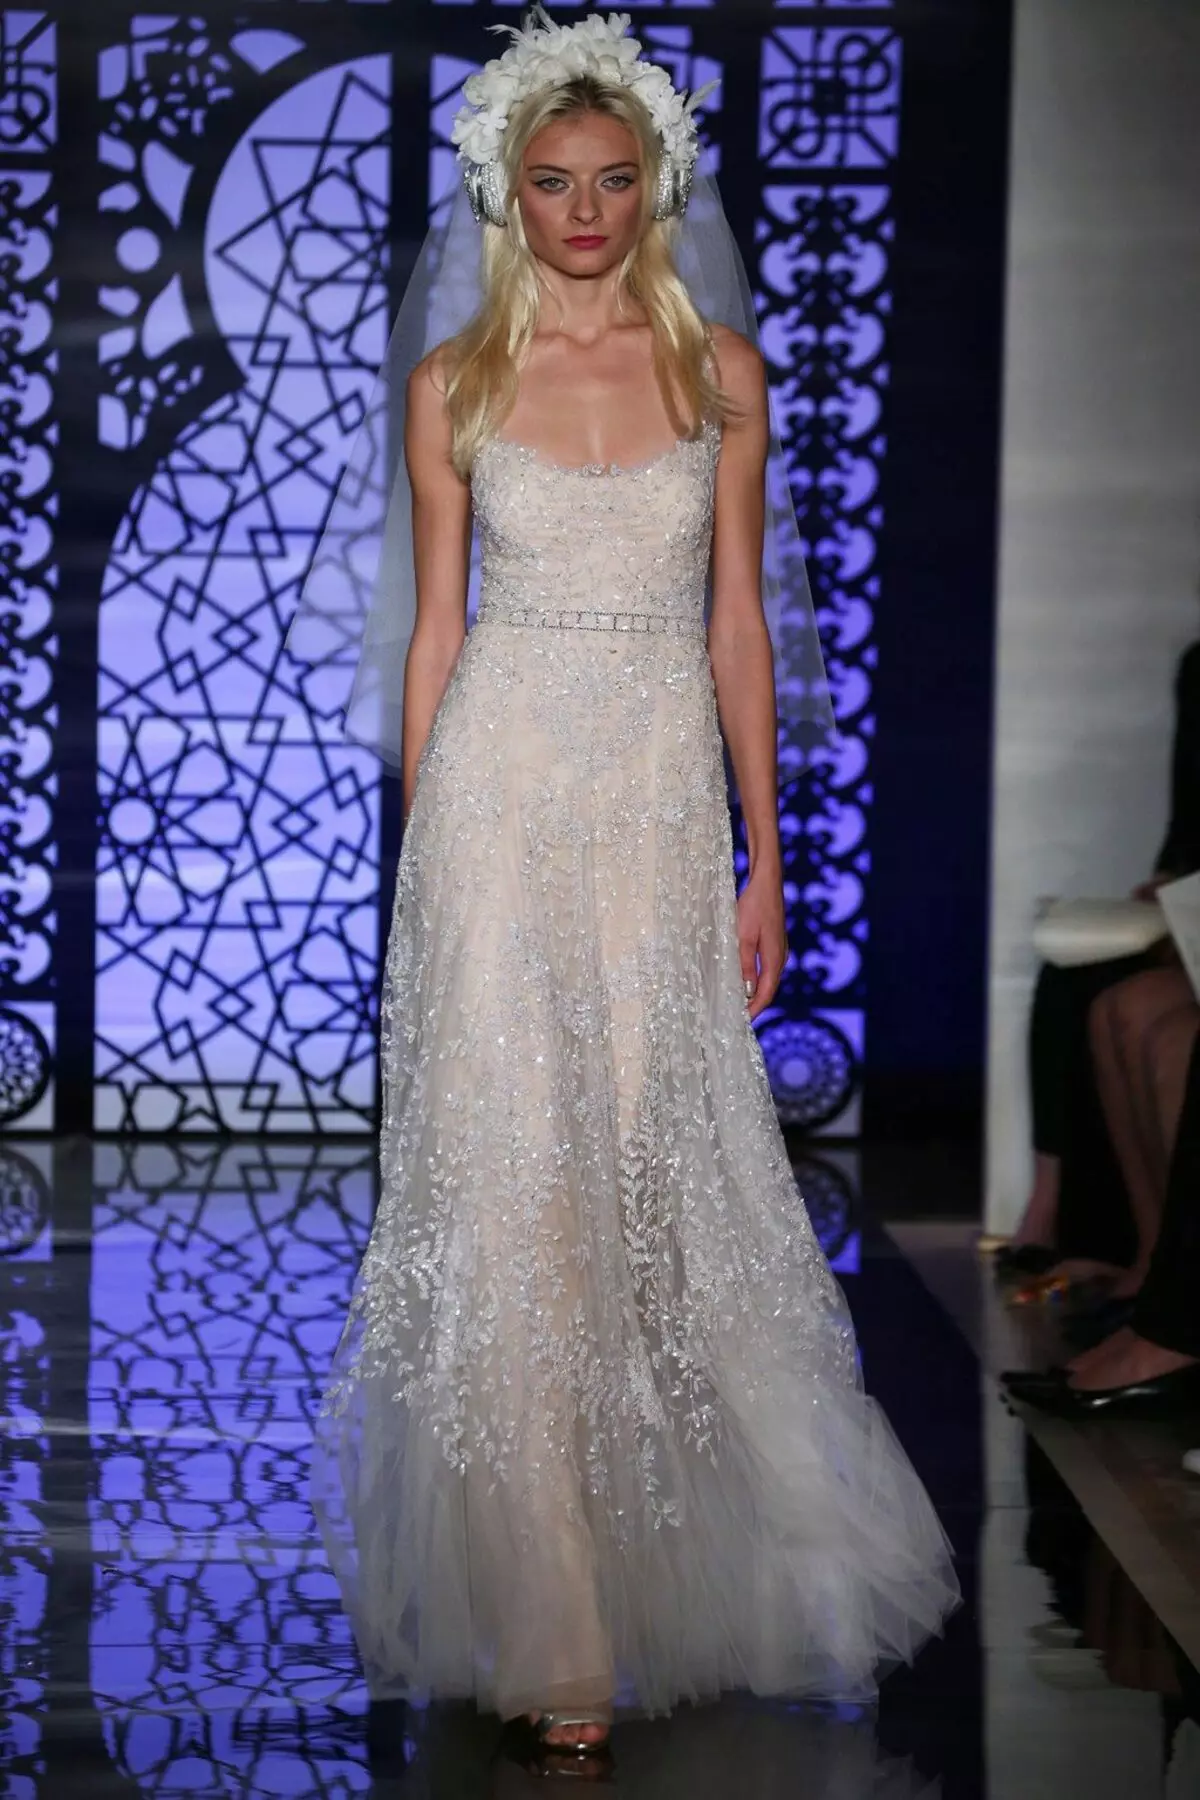 Wedding dress from Rome Acra with crystals